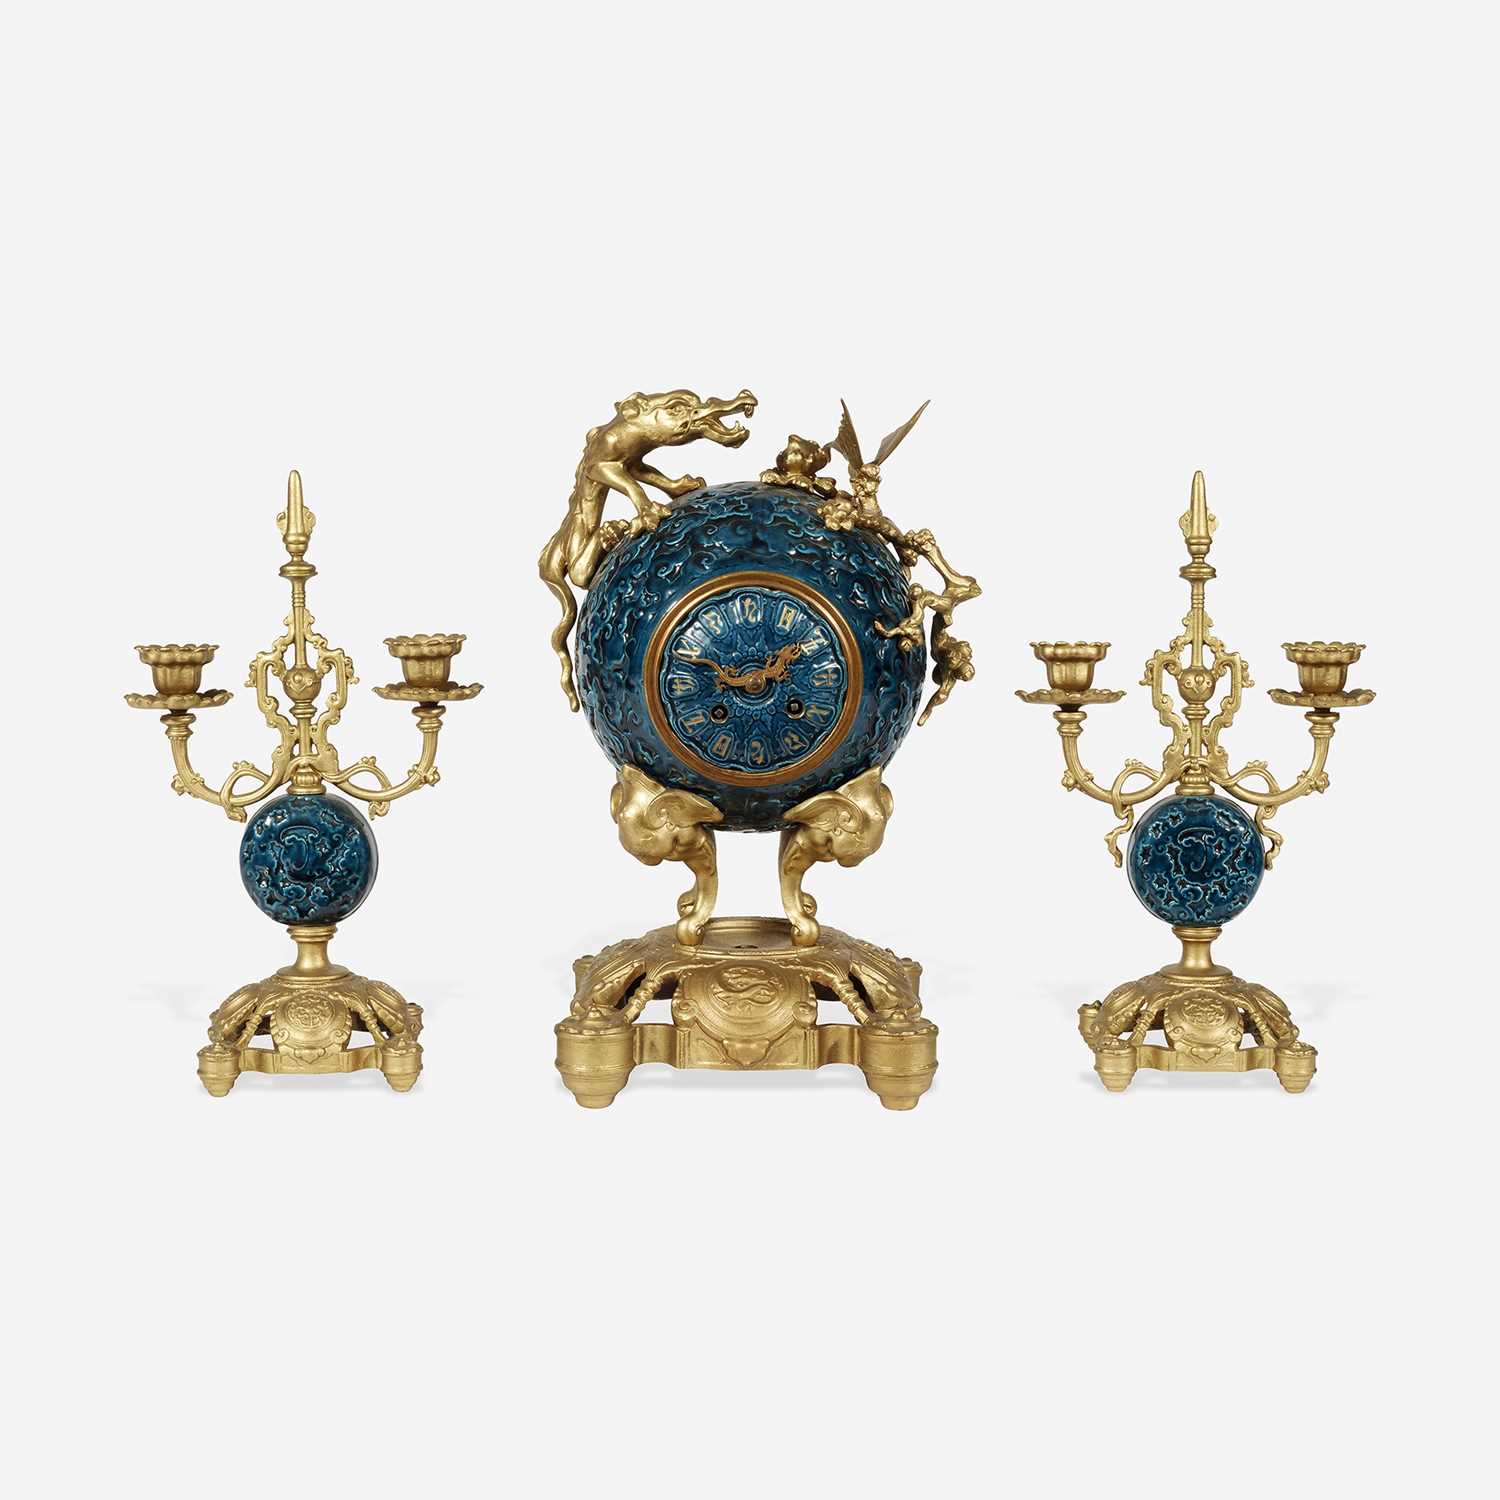 Lot 73 - A Chinese Style Enameled Porcelain and Gilt-Bronze Mounted Clock Garniture